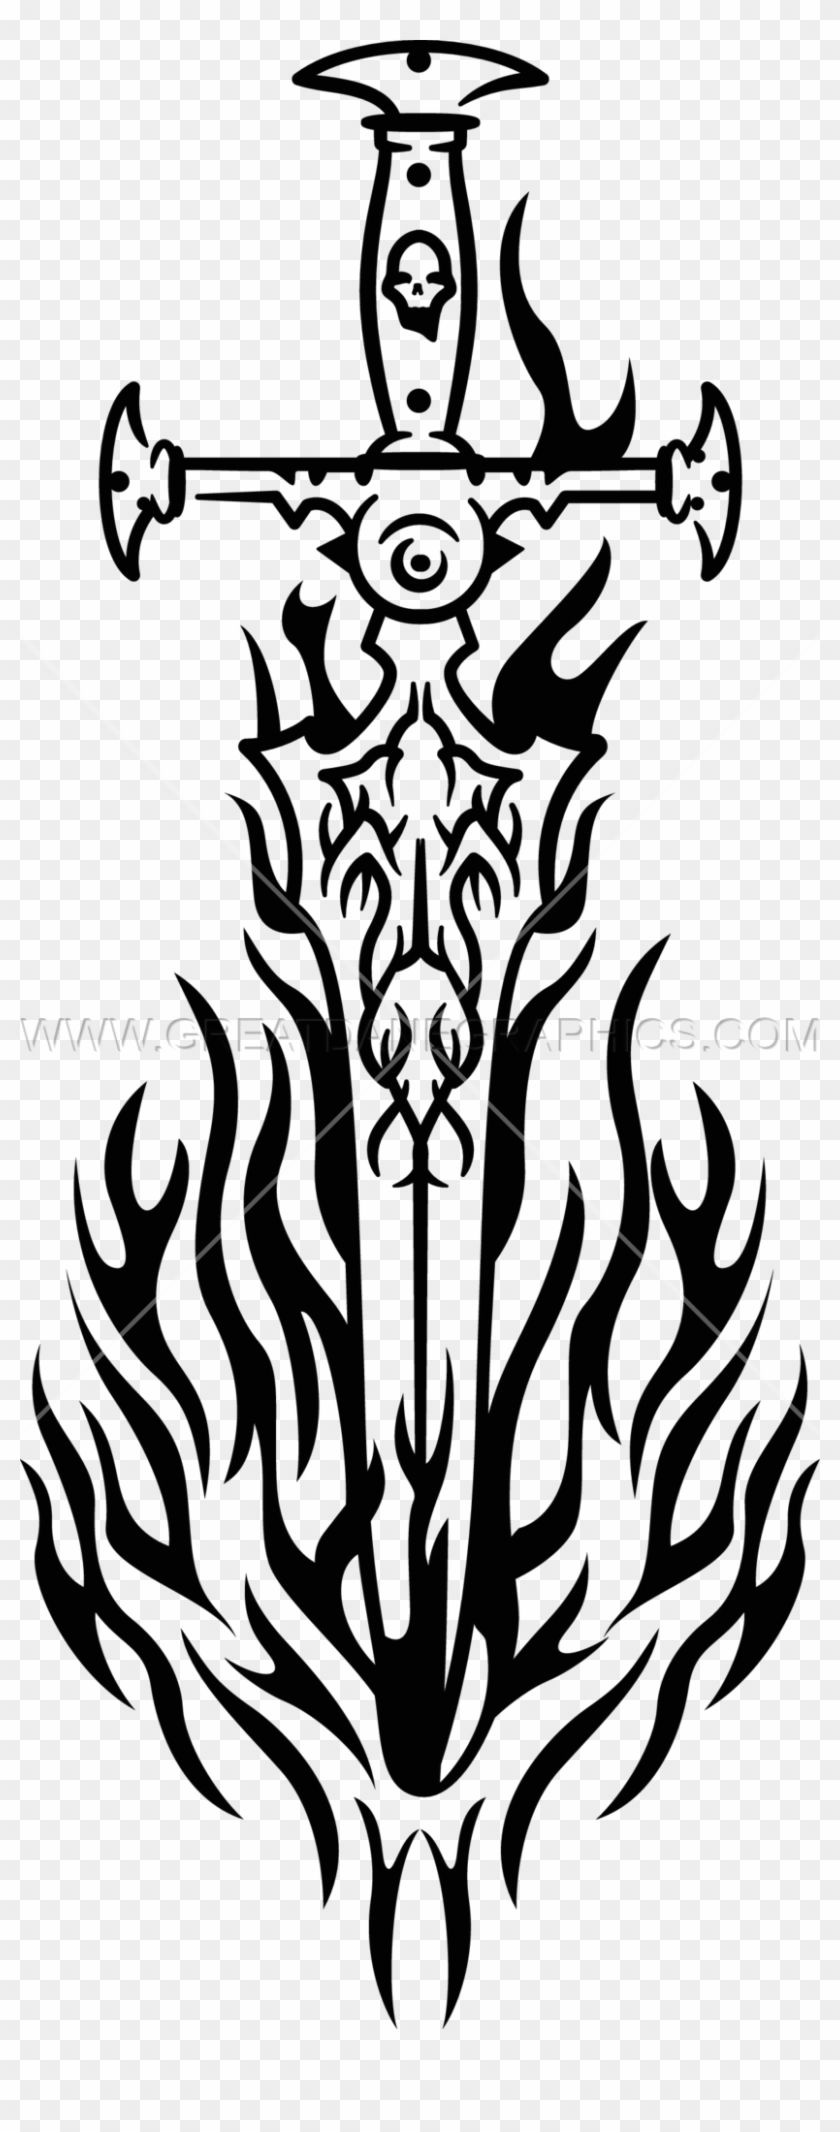 Fire Clipart Sword - Fire Sword Black And White #1399847